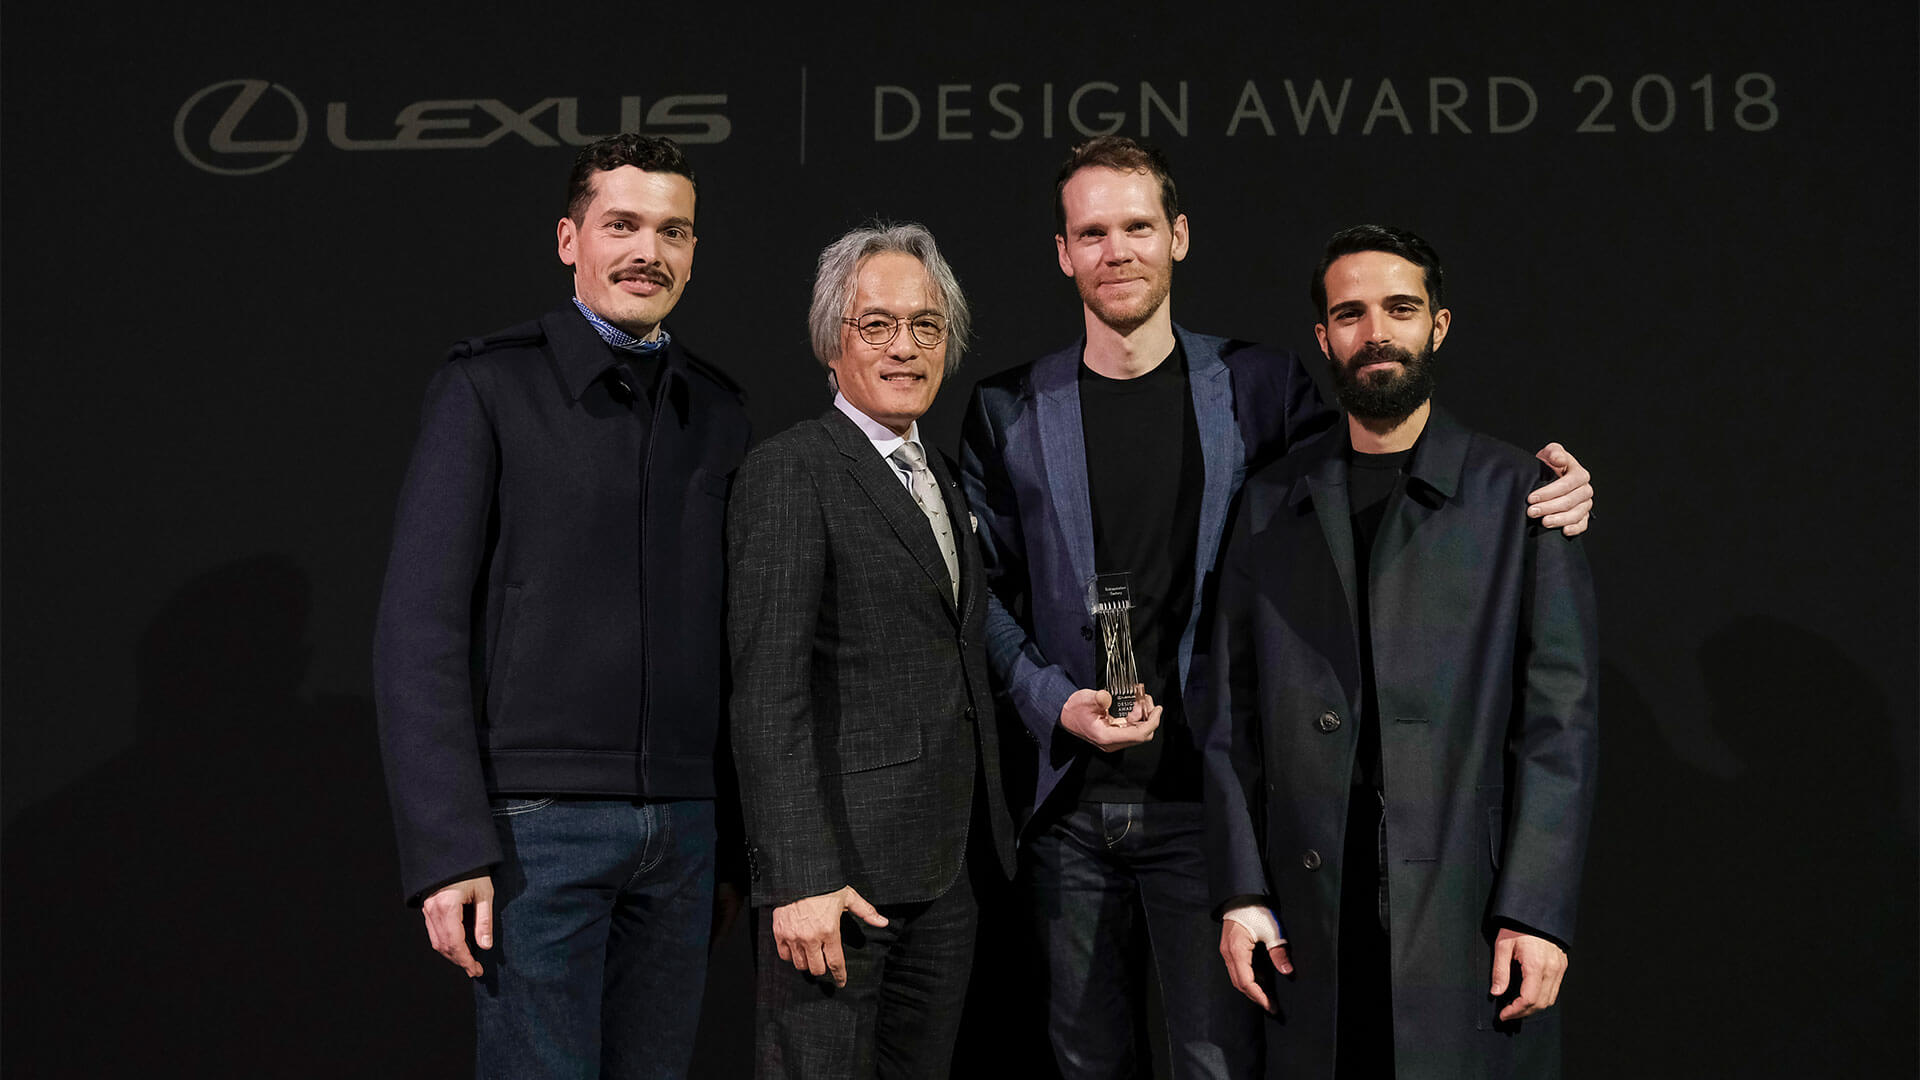 LEXUS DESIGN AWARD 2018 GRAND PRIX WINNER ANNOUNCED AT AMAZING ‘LIMITLESS CO-EXISTENCE’ EXHIBITION IN MILAN